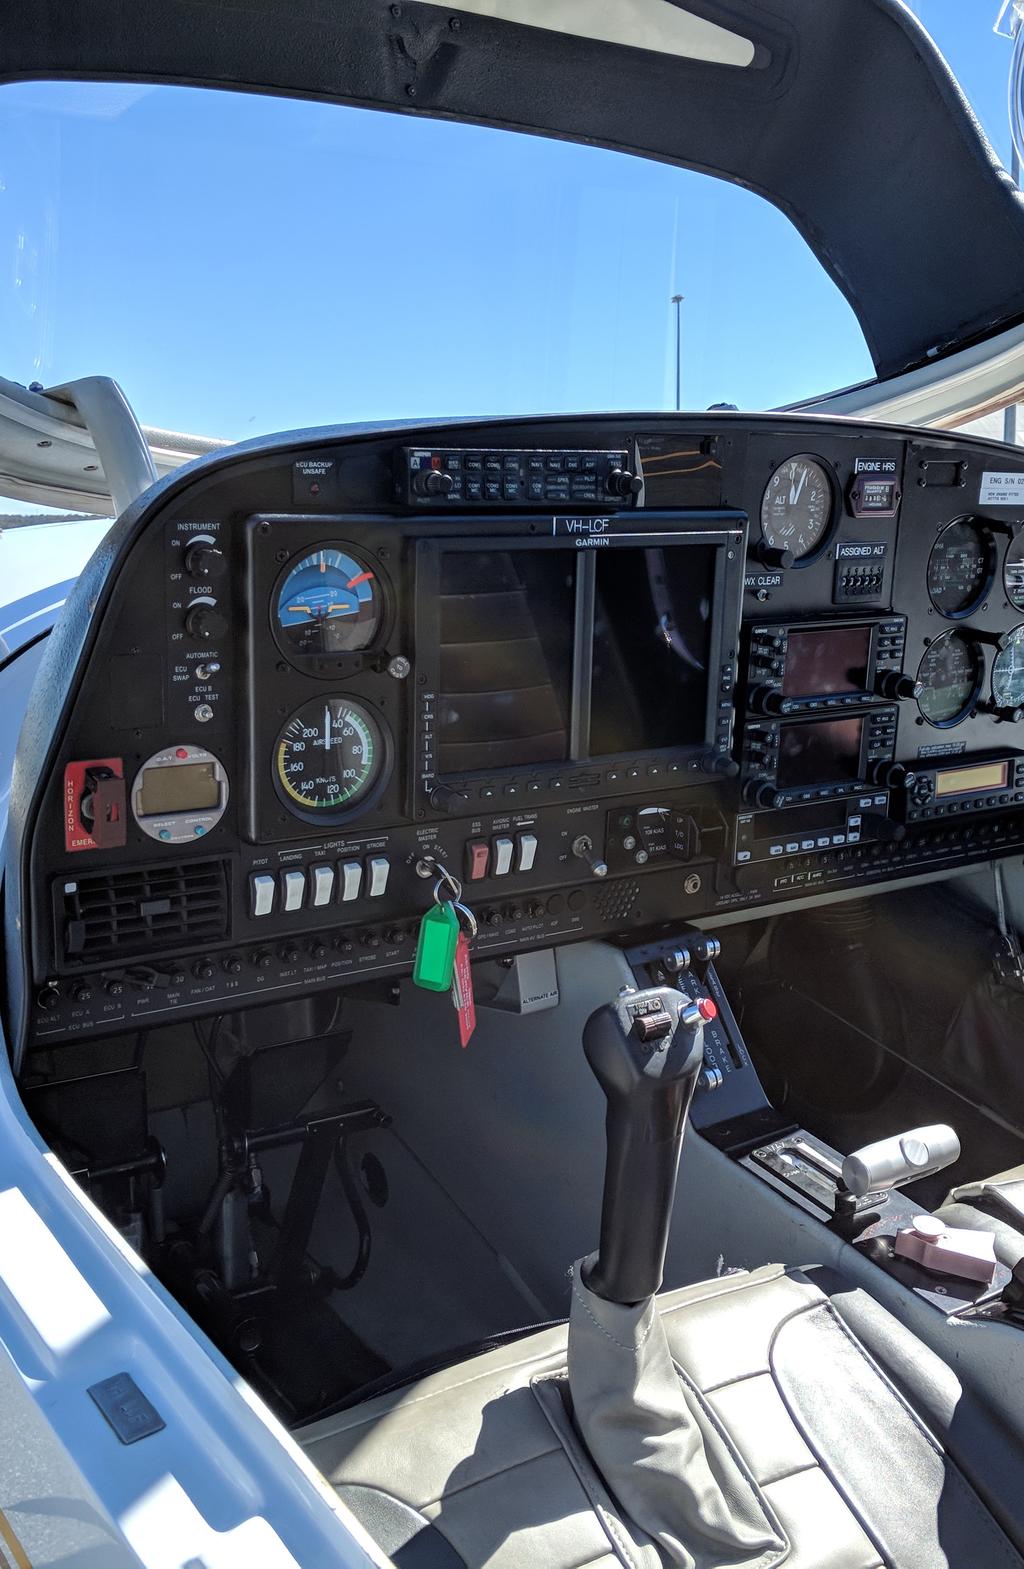 DIPLOMA OF AVIATION (COMMERCIAL PILOT LICENCE AEROPLANE) A Diploma of Aviation is the goal for most pilots because it gives you the greatest opportunity to land a career in the field.